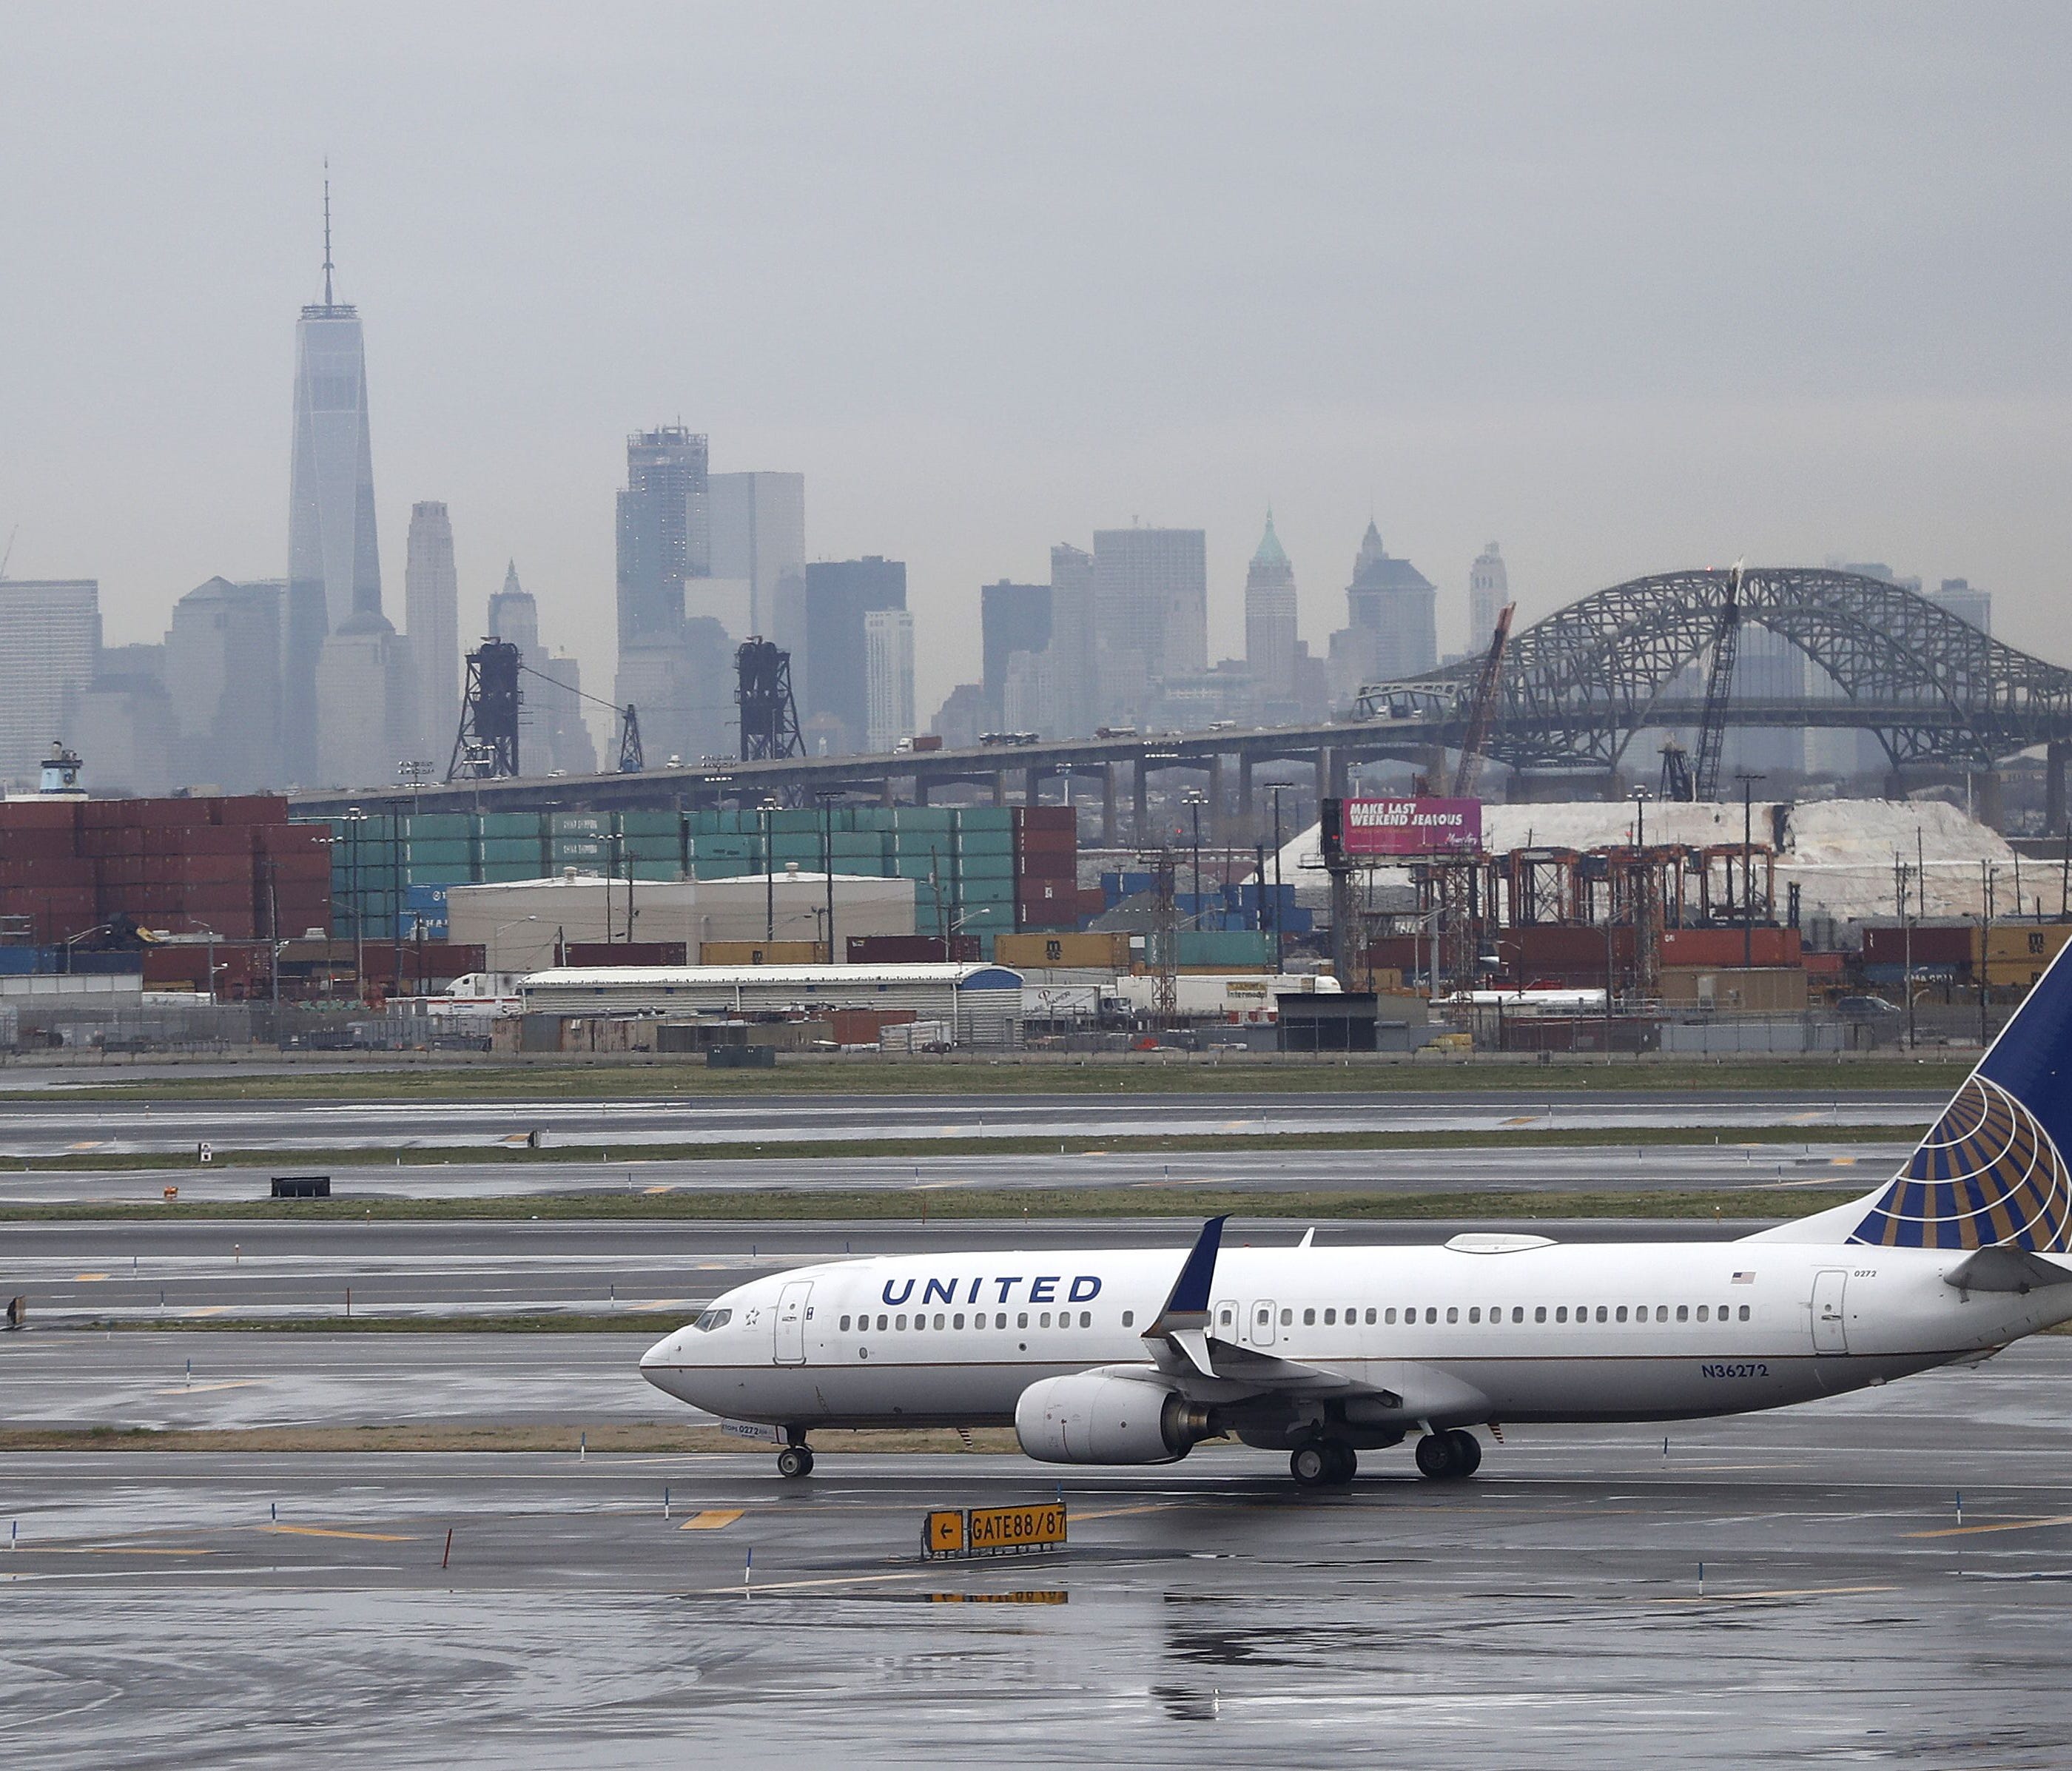 A United Airlines jet taxis at Newark Liberty International Airport on April 12, 2017.